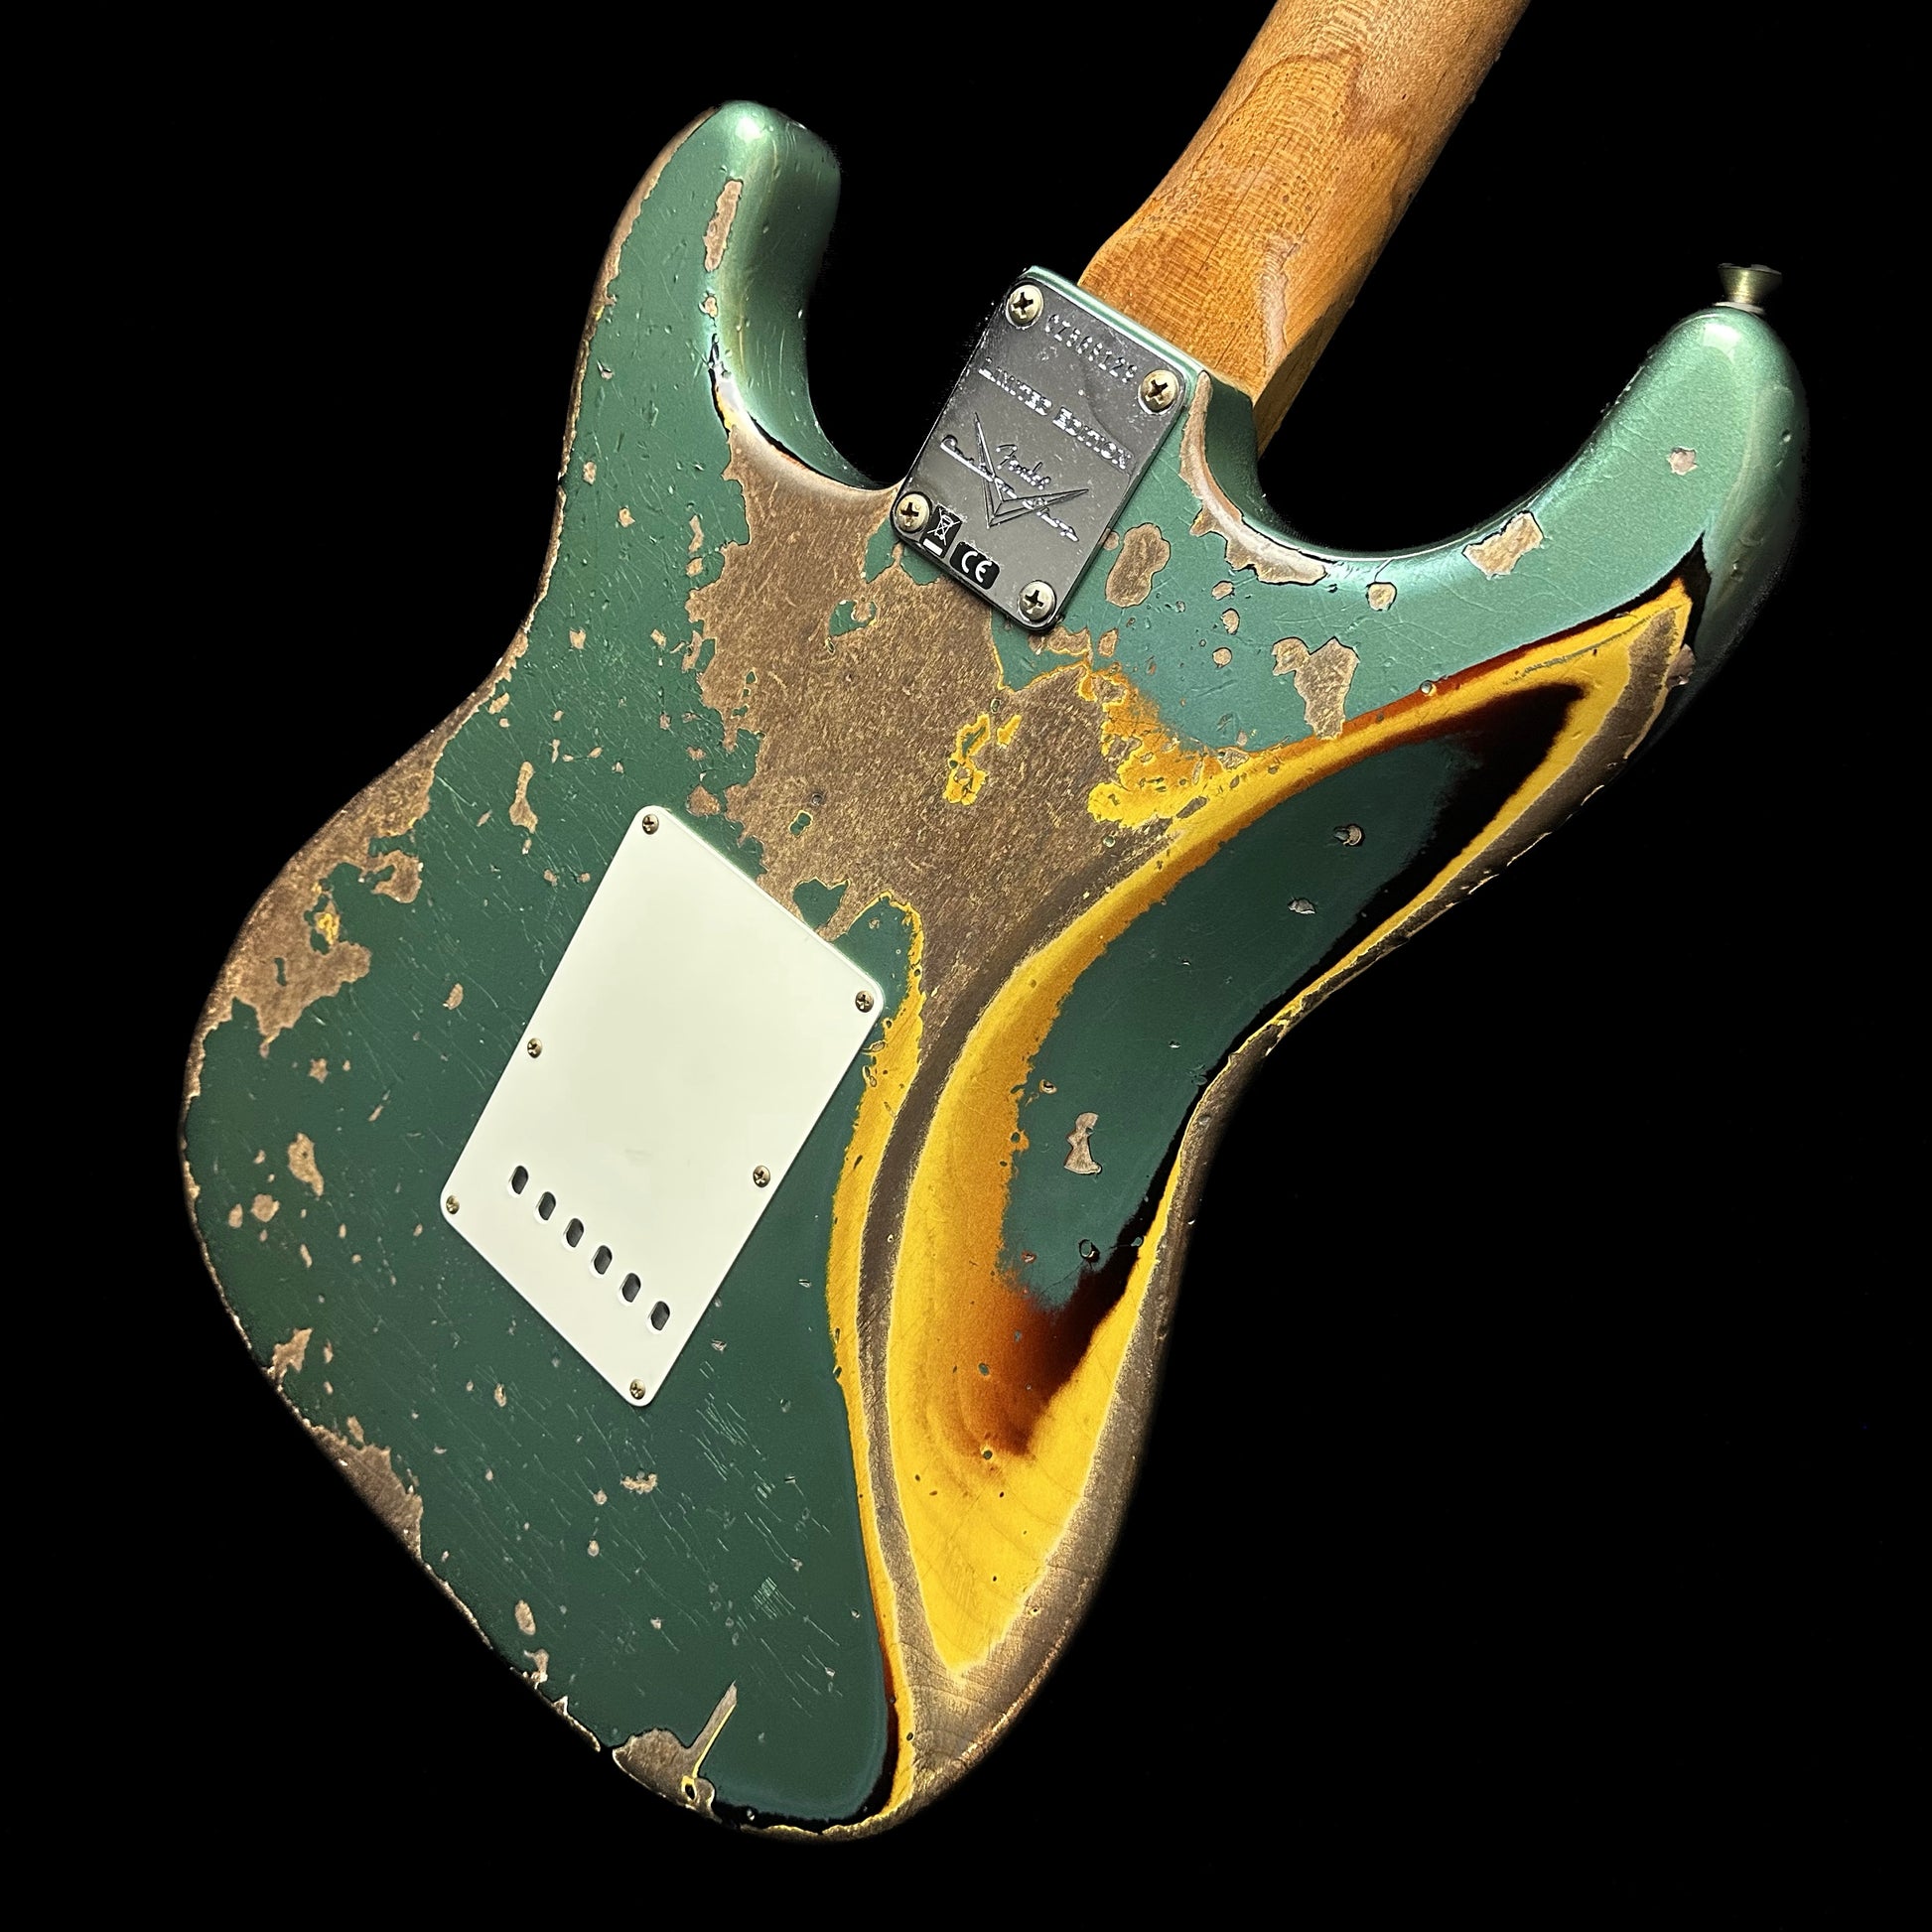 Top down angle of Fender Custom Shop  Limited Edition Roasted 1961 Stratocaster Super Heavy Relic Aged Sherwood Green Metallic/3TSB back.